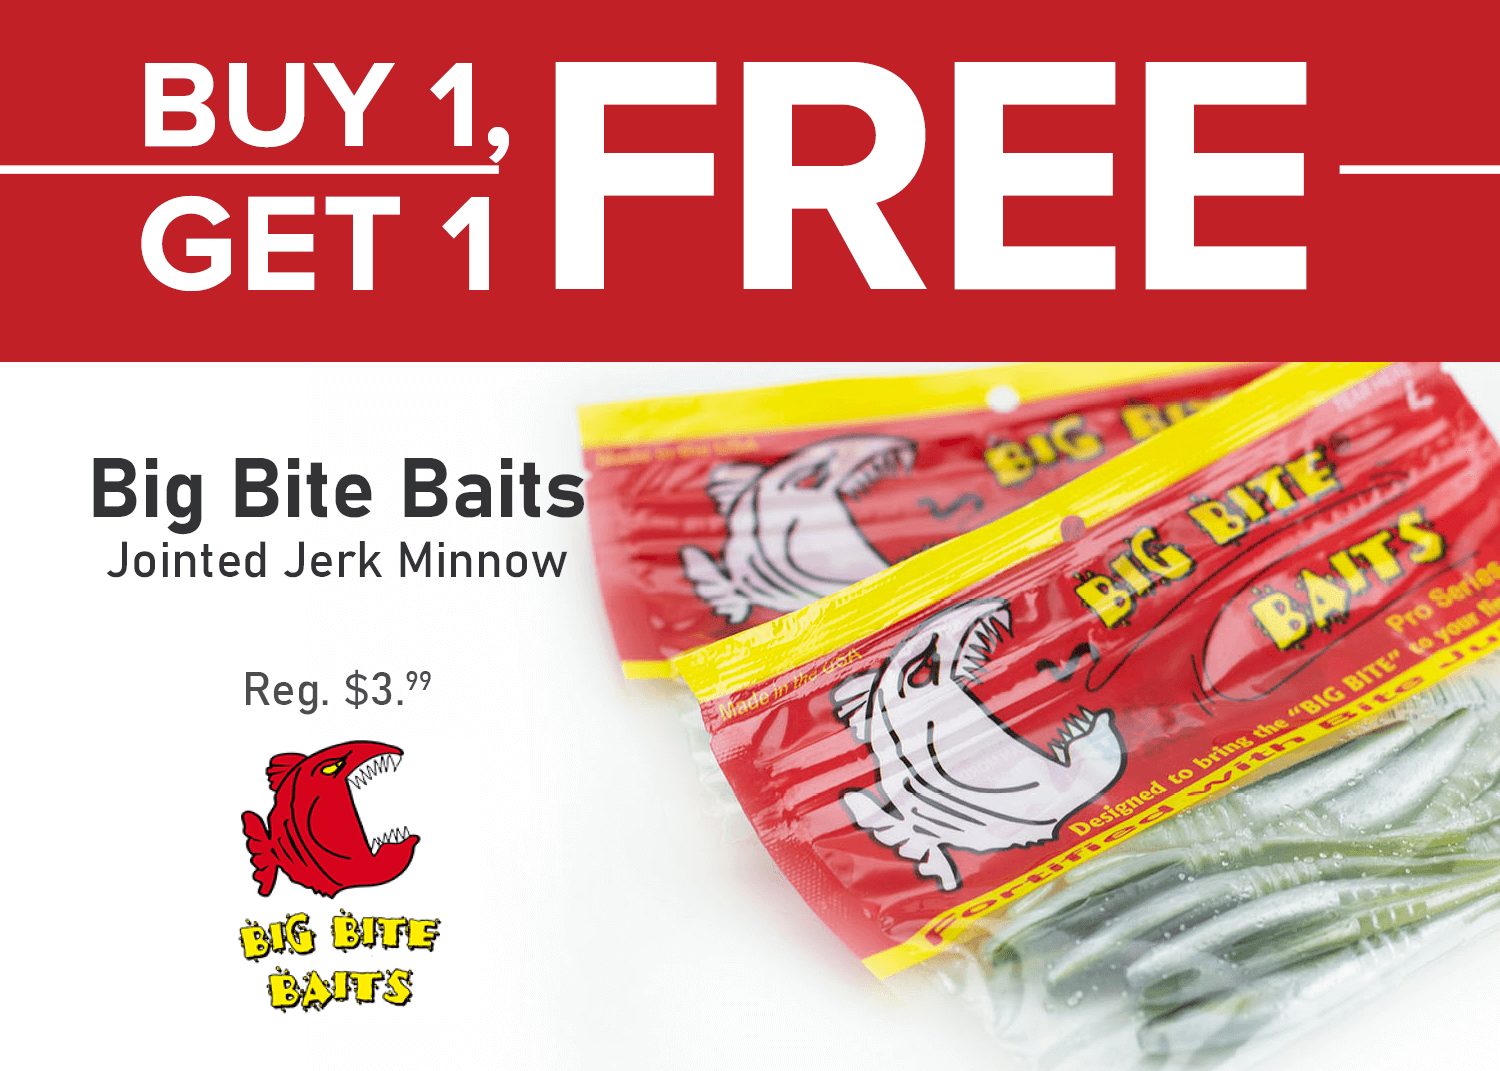 Buy 1, Get 1 FREE on Big Bite Baits Jointed Jerk Minnows!